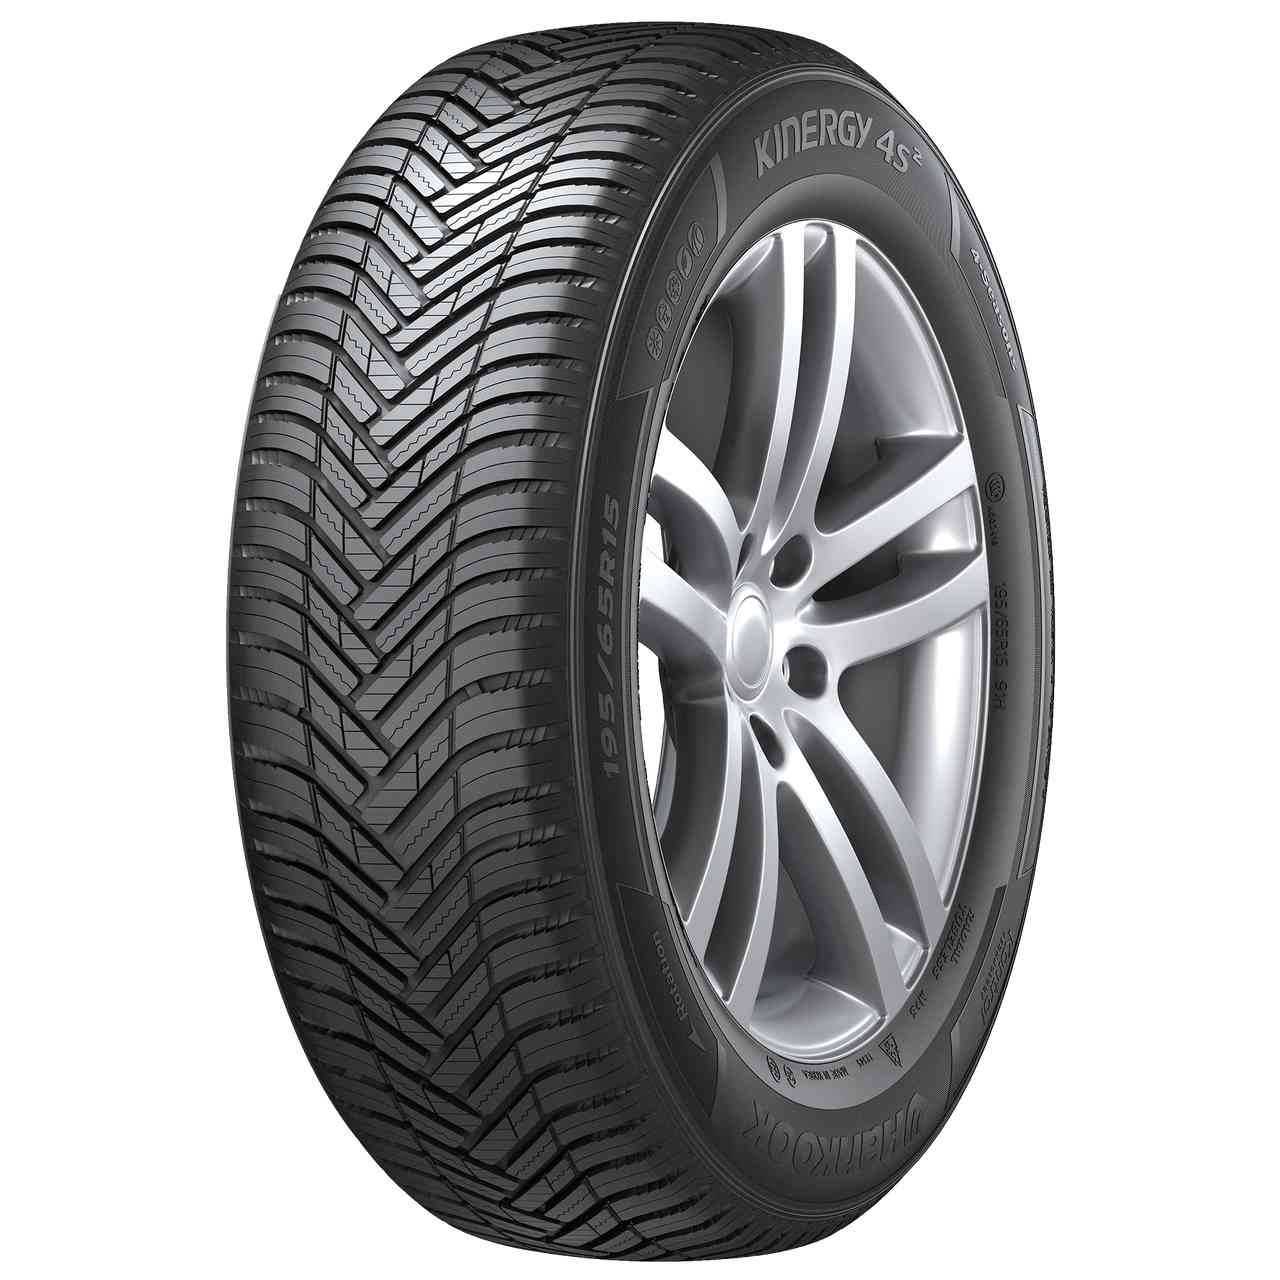 HANKOOK KINERGY 4S 2 (H750) 225/55R17 101W BSW